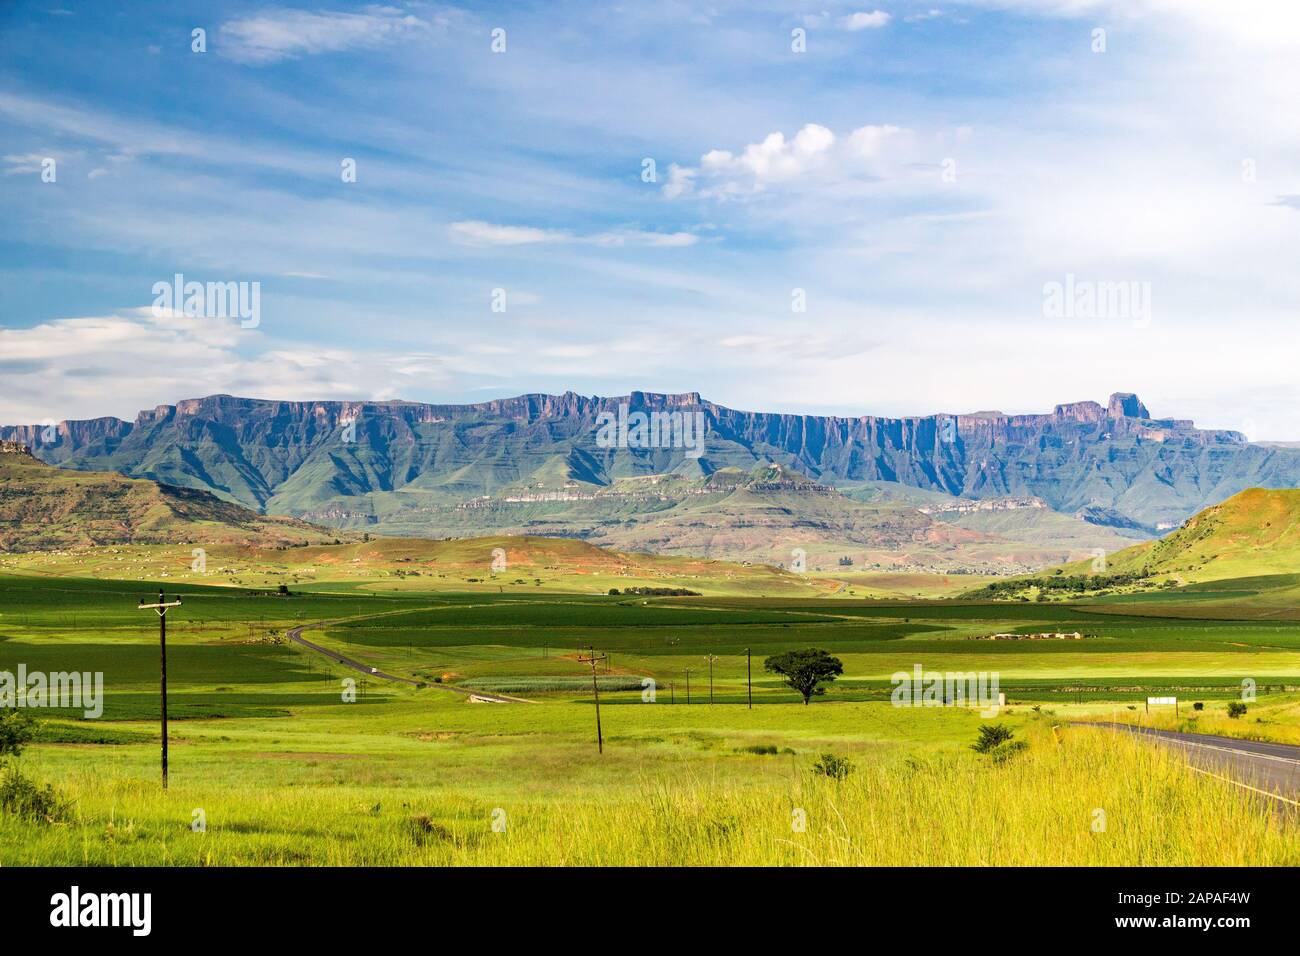 The Amphitheatre of the Drakensberg mountains on a sunny summer day, Royal Natal National Park, South Africa Stock Photo